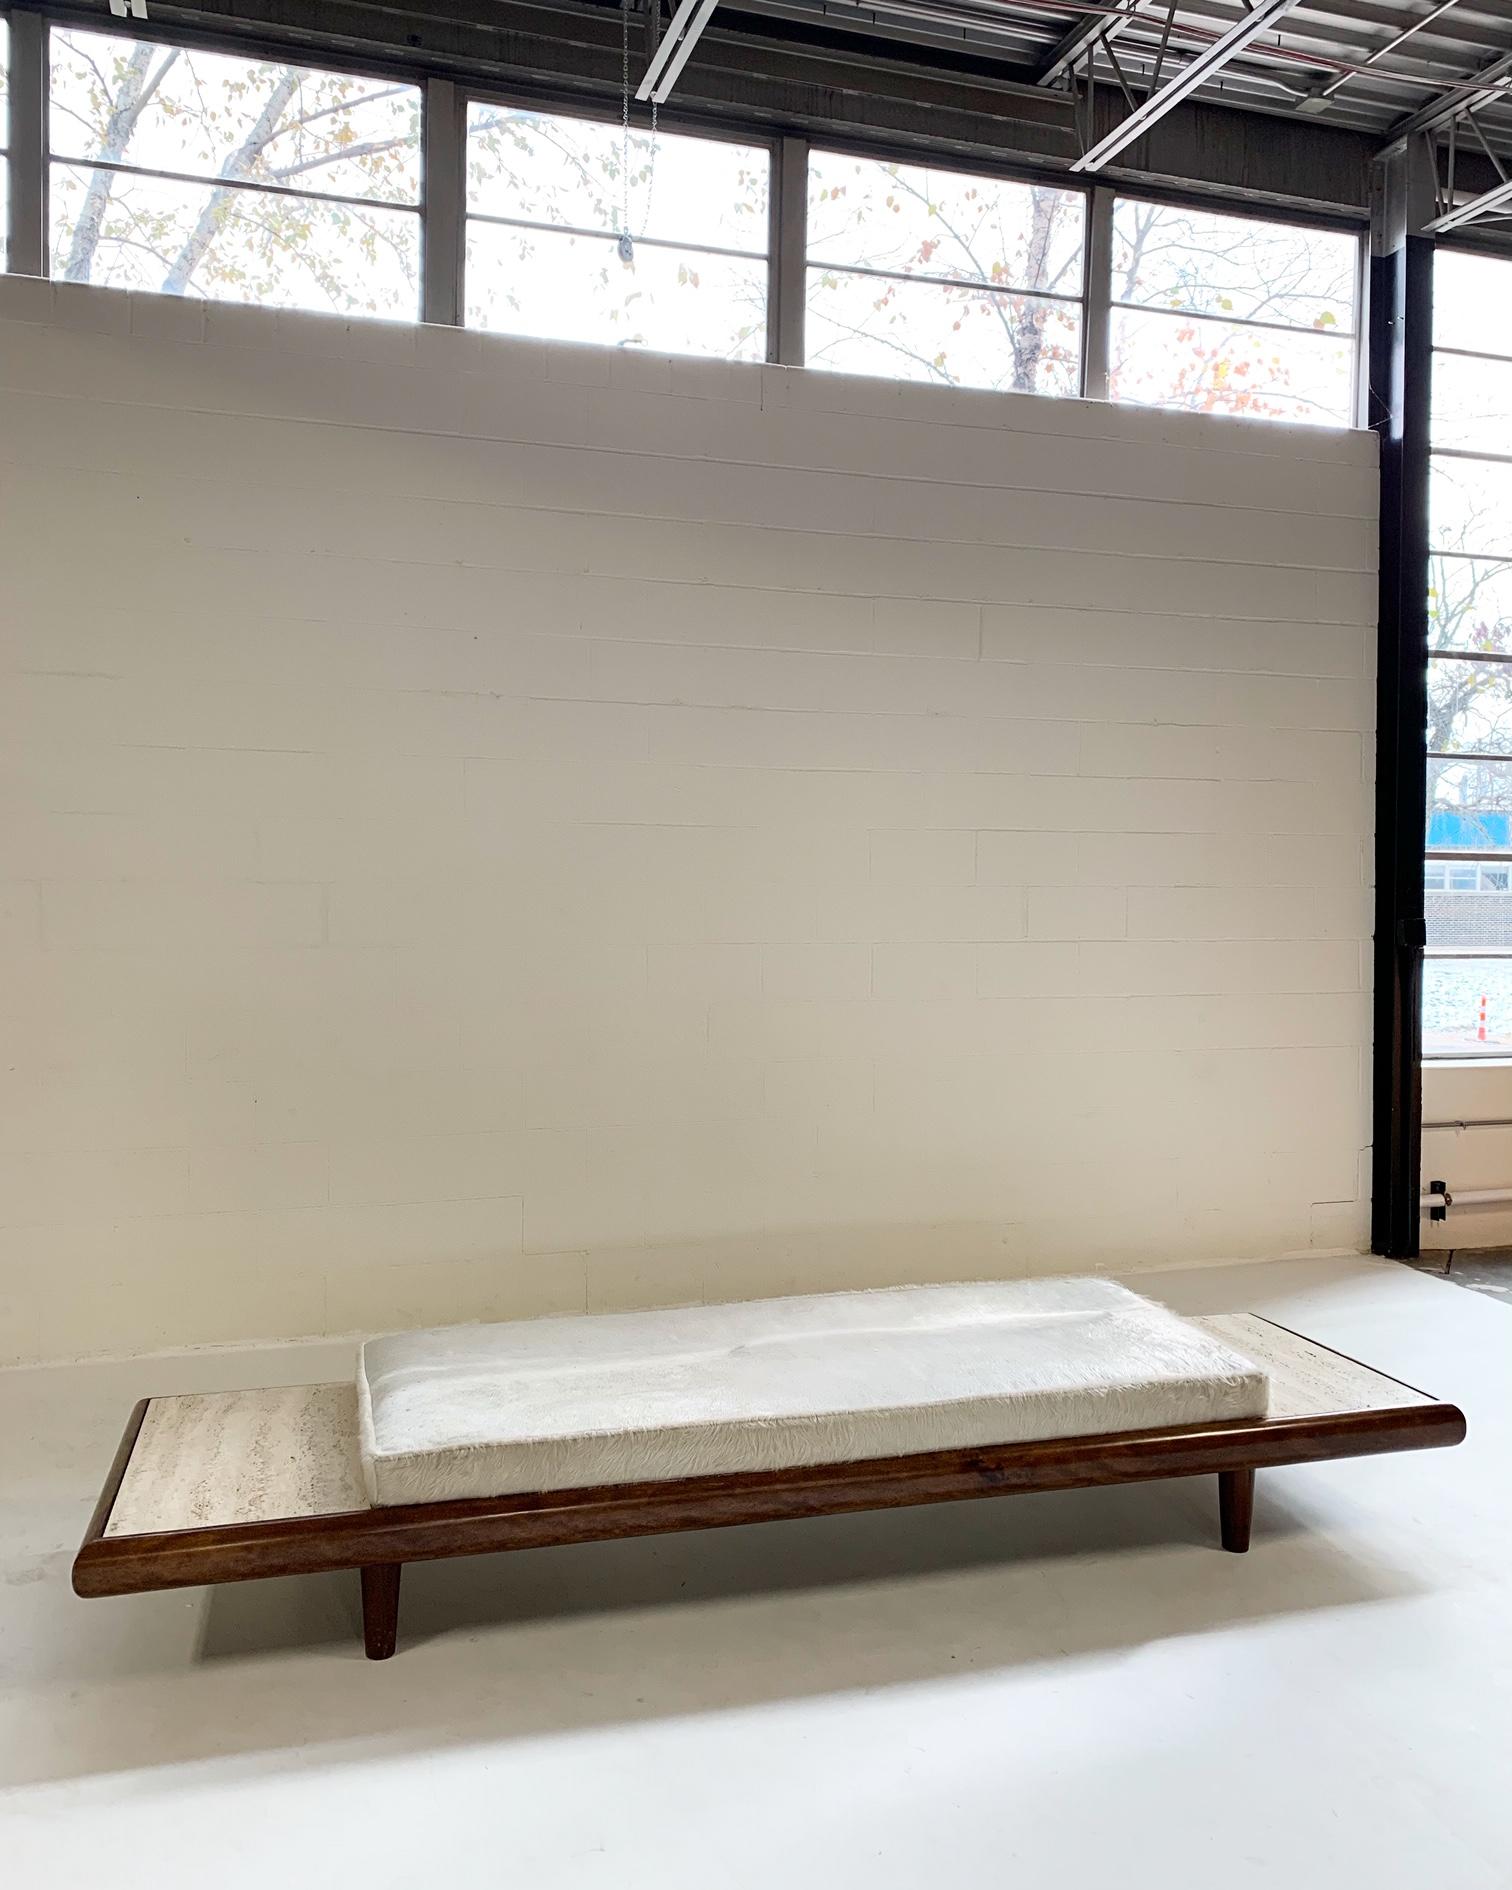 Vintage Adrian Pearsall style walnut and travertine daybed sofa with custom Brazilian ivory cowhide cushion.

We love the look of this daybed. The walnut frame, the travertine marble details. For its restoration, our designers chose the